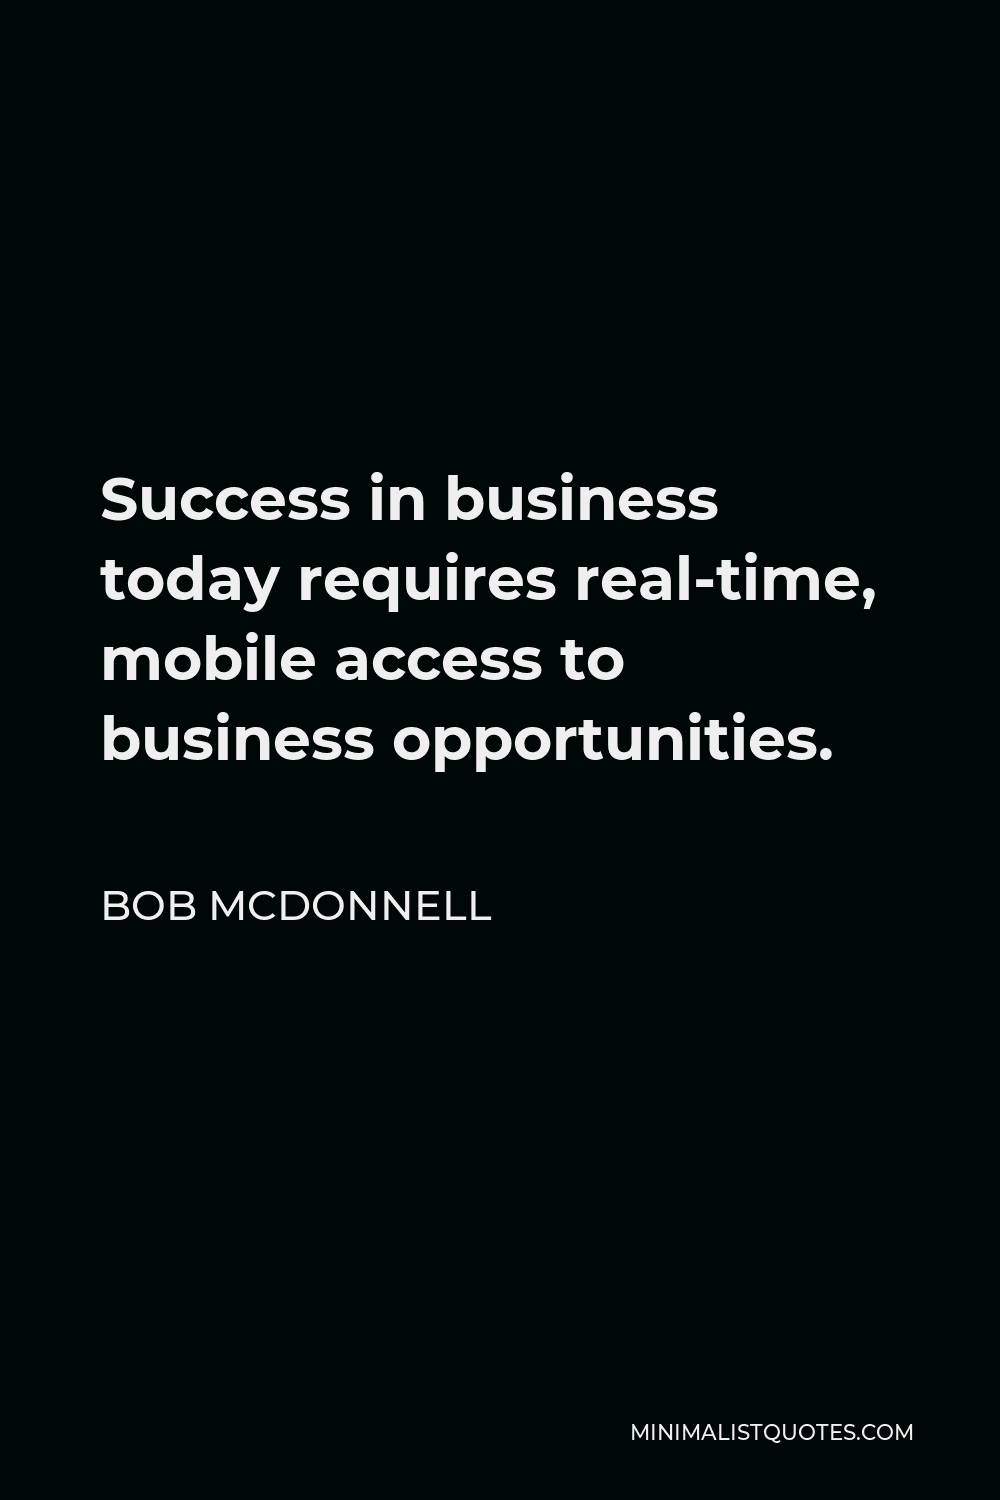 Bob McDonnell Quote - Success in business today requires real-time, mobile access to business opportunities.